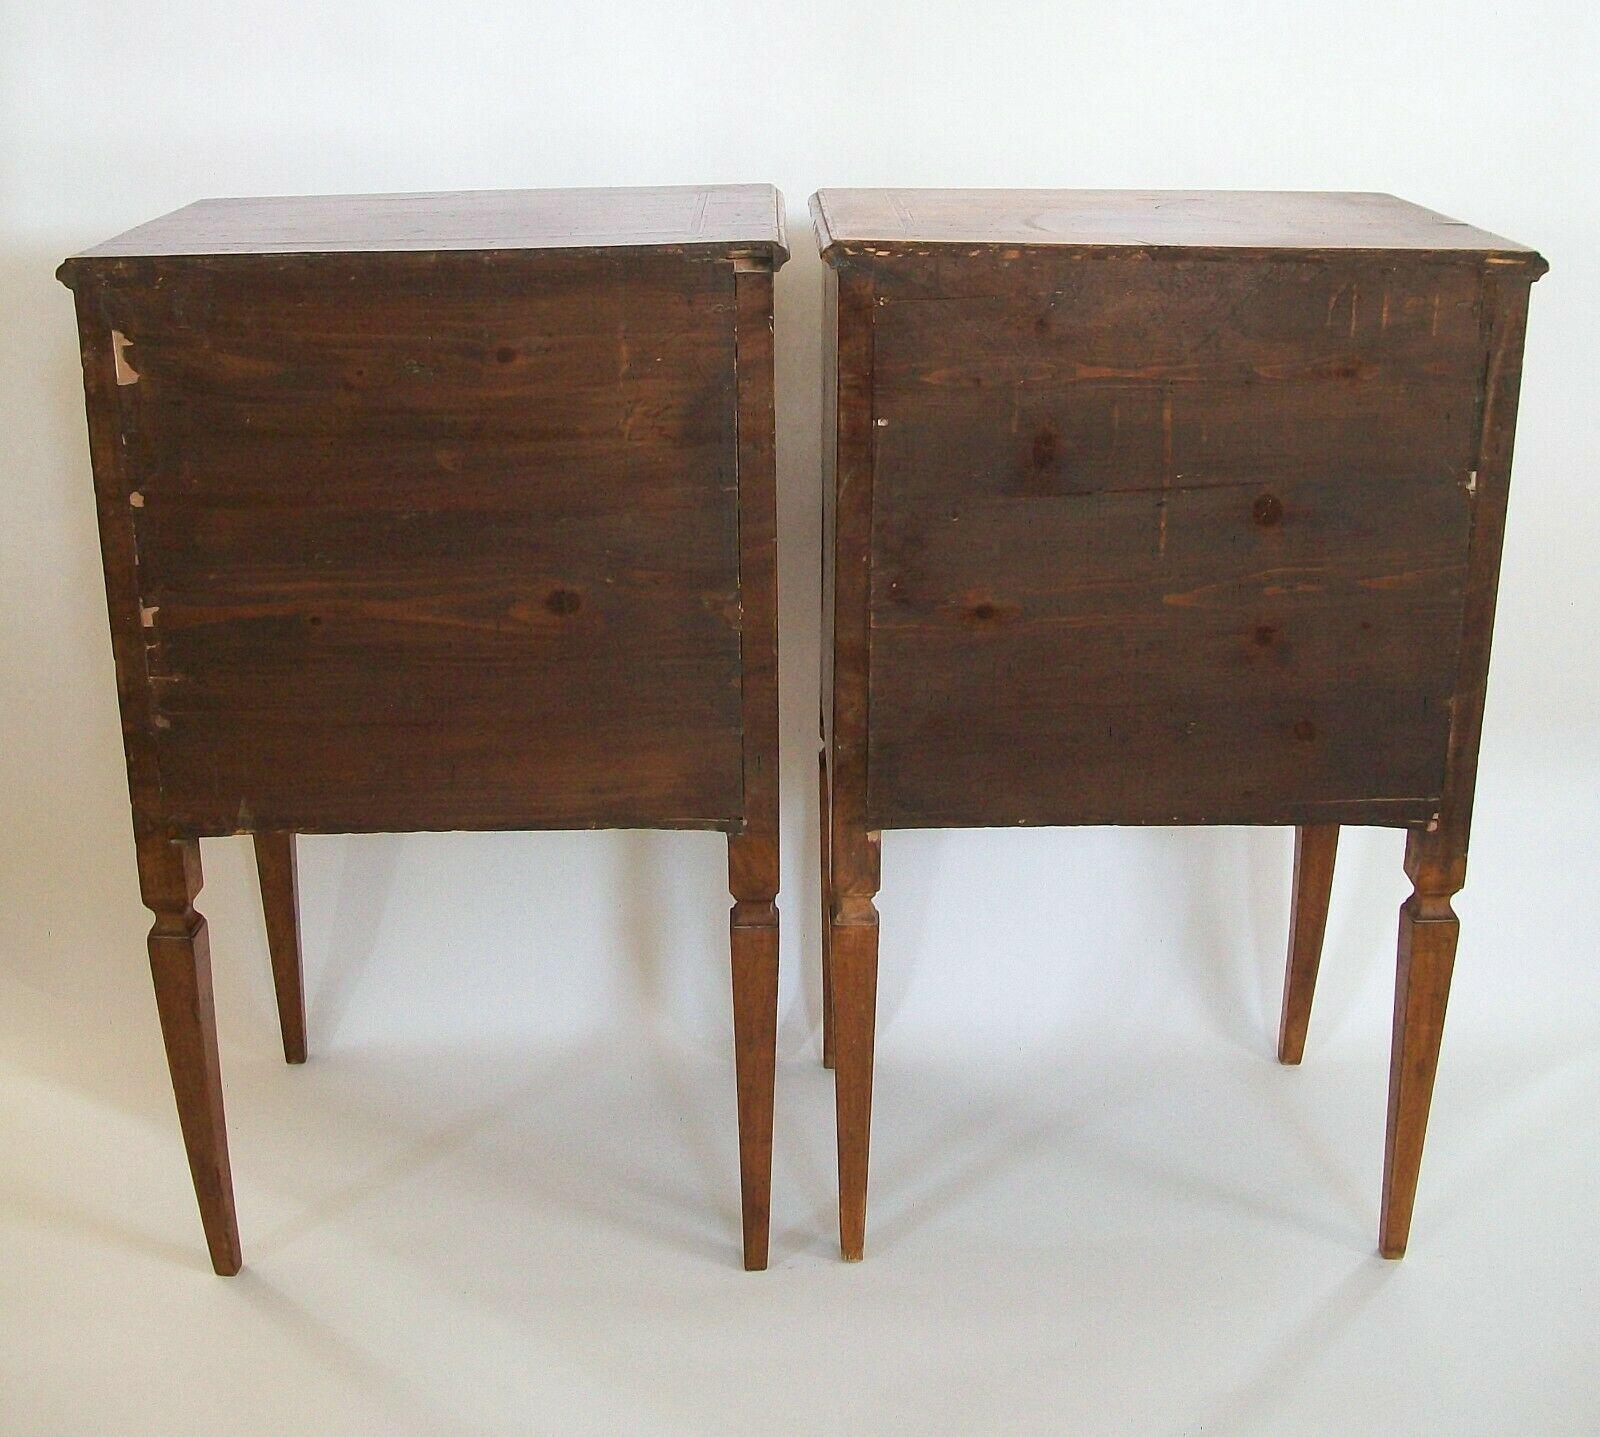 North Italian Antique Pair of Walnut Neoclassical Bedside Tables, Circa 1820 In Good Condition For Sale In Chatham, ON